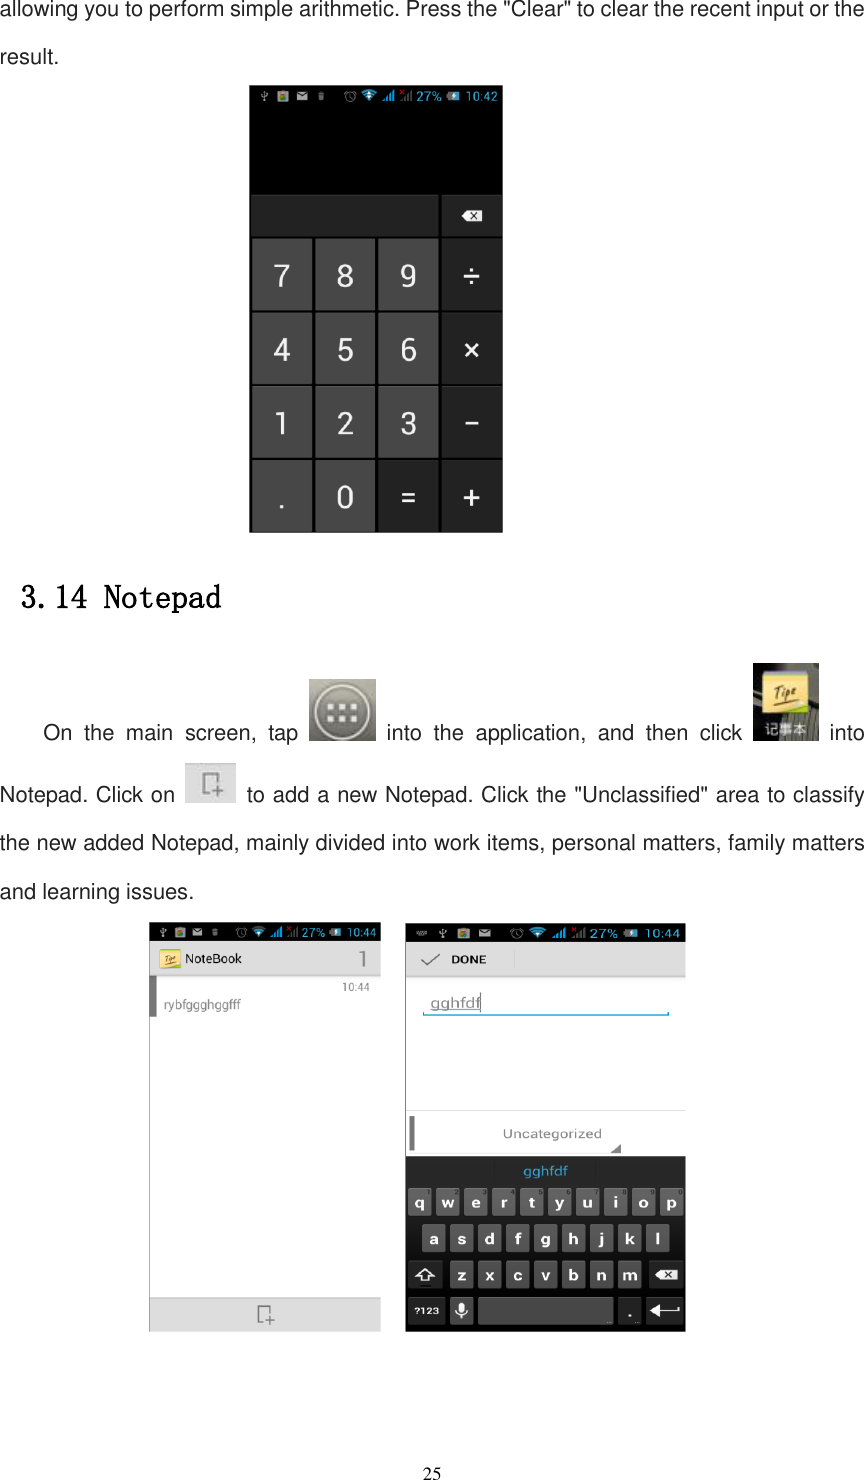   25 allowing you to perform simple arithmetic. Press the &quot;Clear&quot; to clear the recent input or the result.  3.14 Notepad On  the  main  screen,  tap    into  the  application,  and  then  click    into Notepad. Click on    to add a new Notepad. Click the &quot;Unclassified&quot; area to classify the new added Notepad, mainly divided into work items, personal matters, family matters and learning issues.     